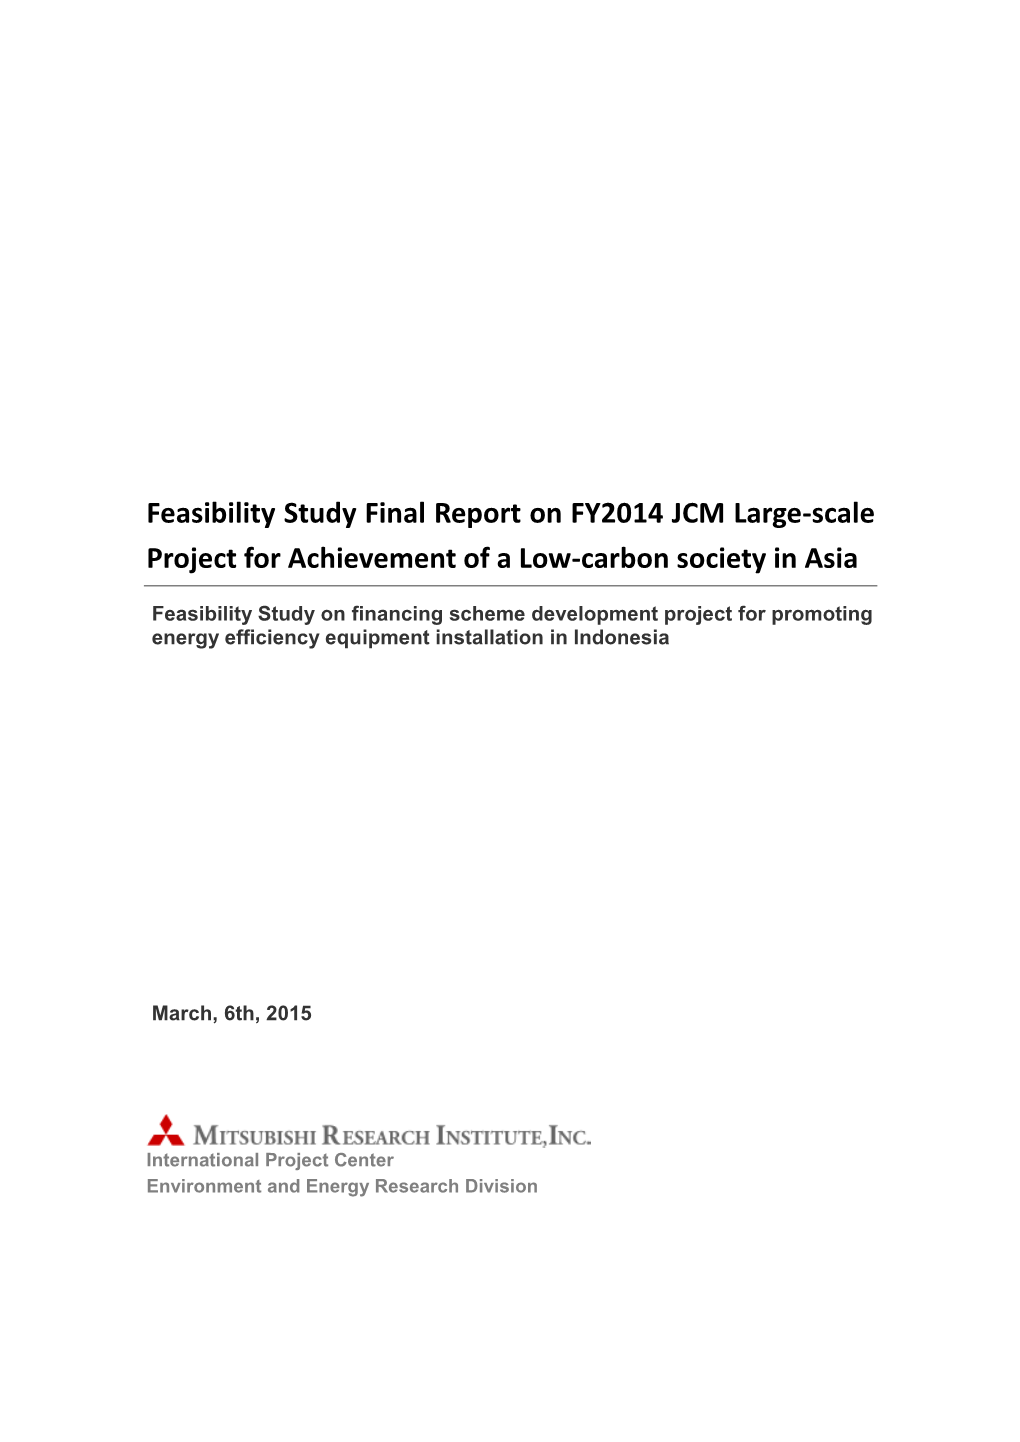 Feasibility Study Final Report on FY2014 JCM Large-Scale Project for Achievement of a Low-Carbon Society in Asia